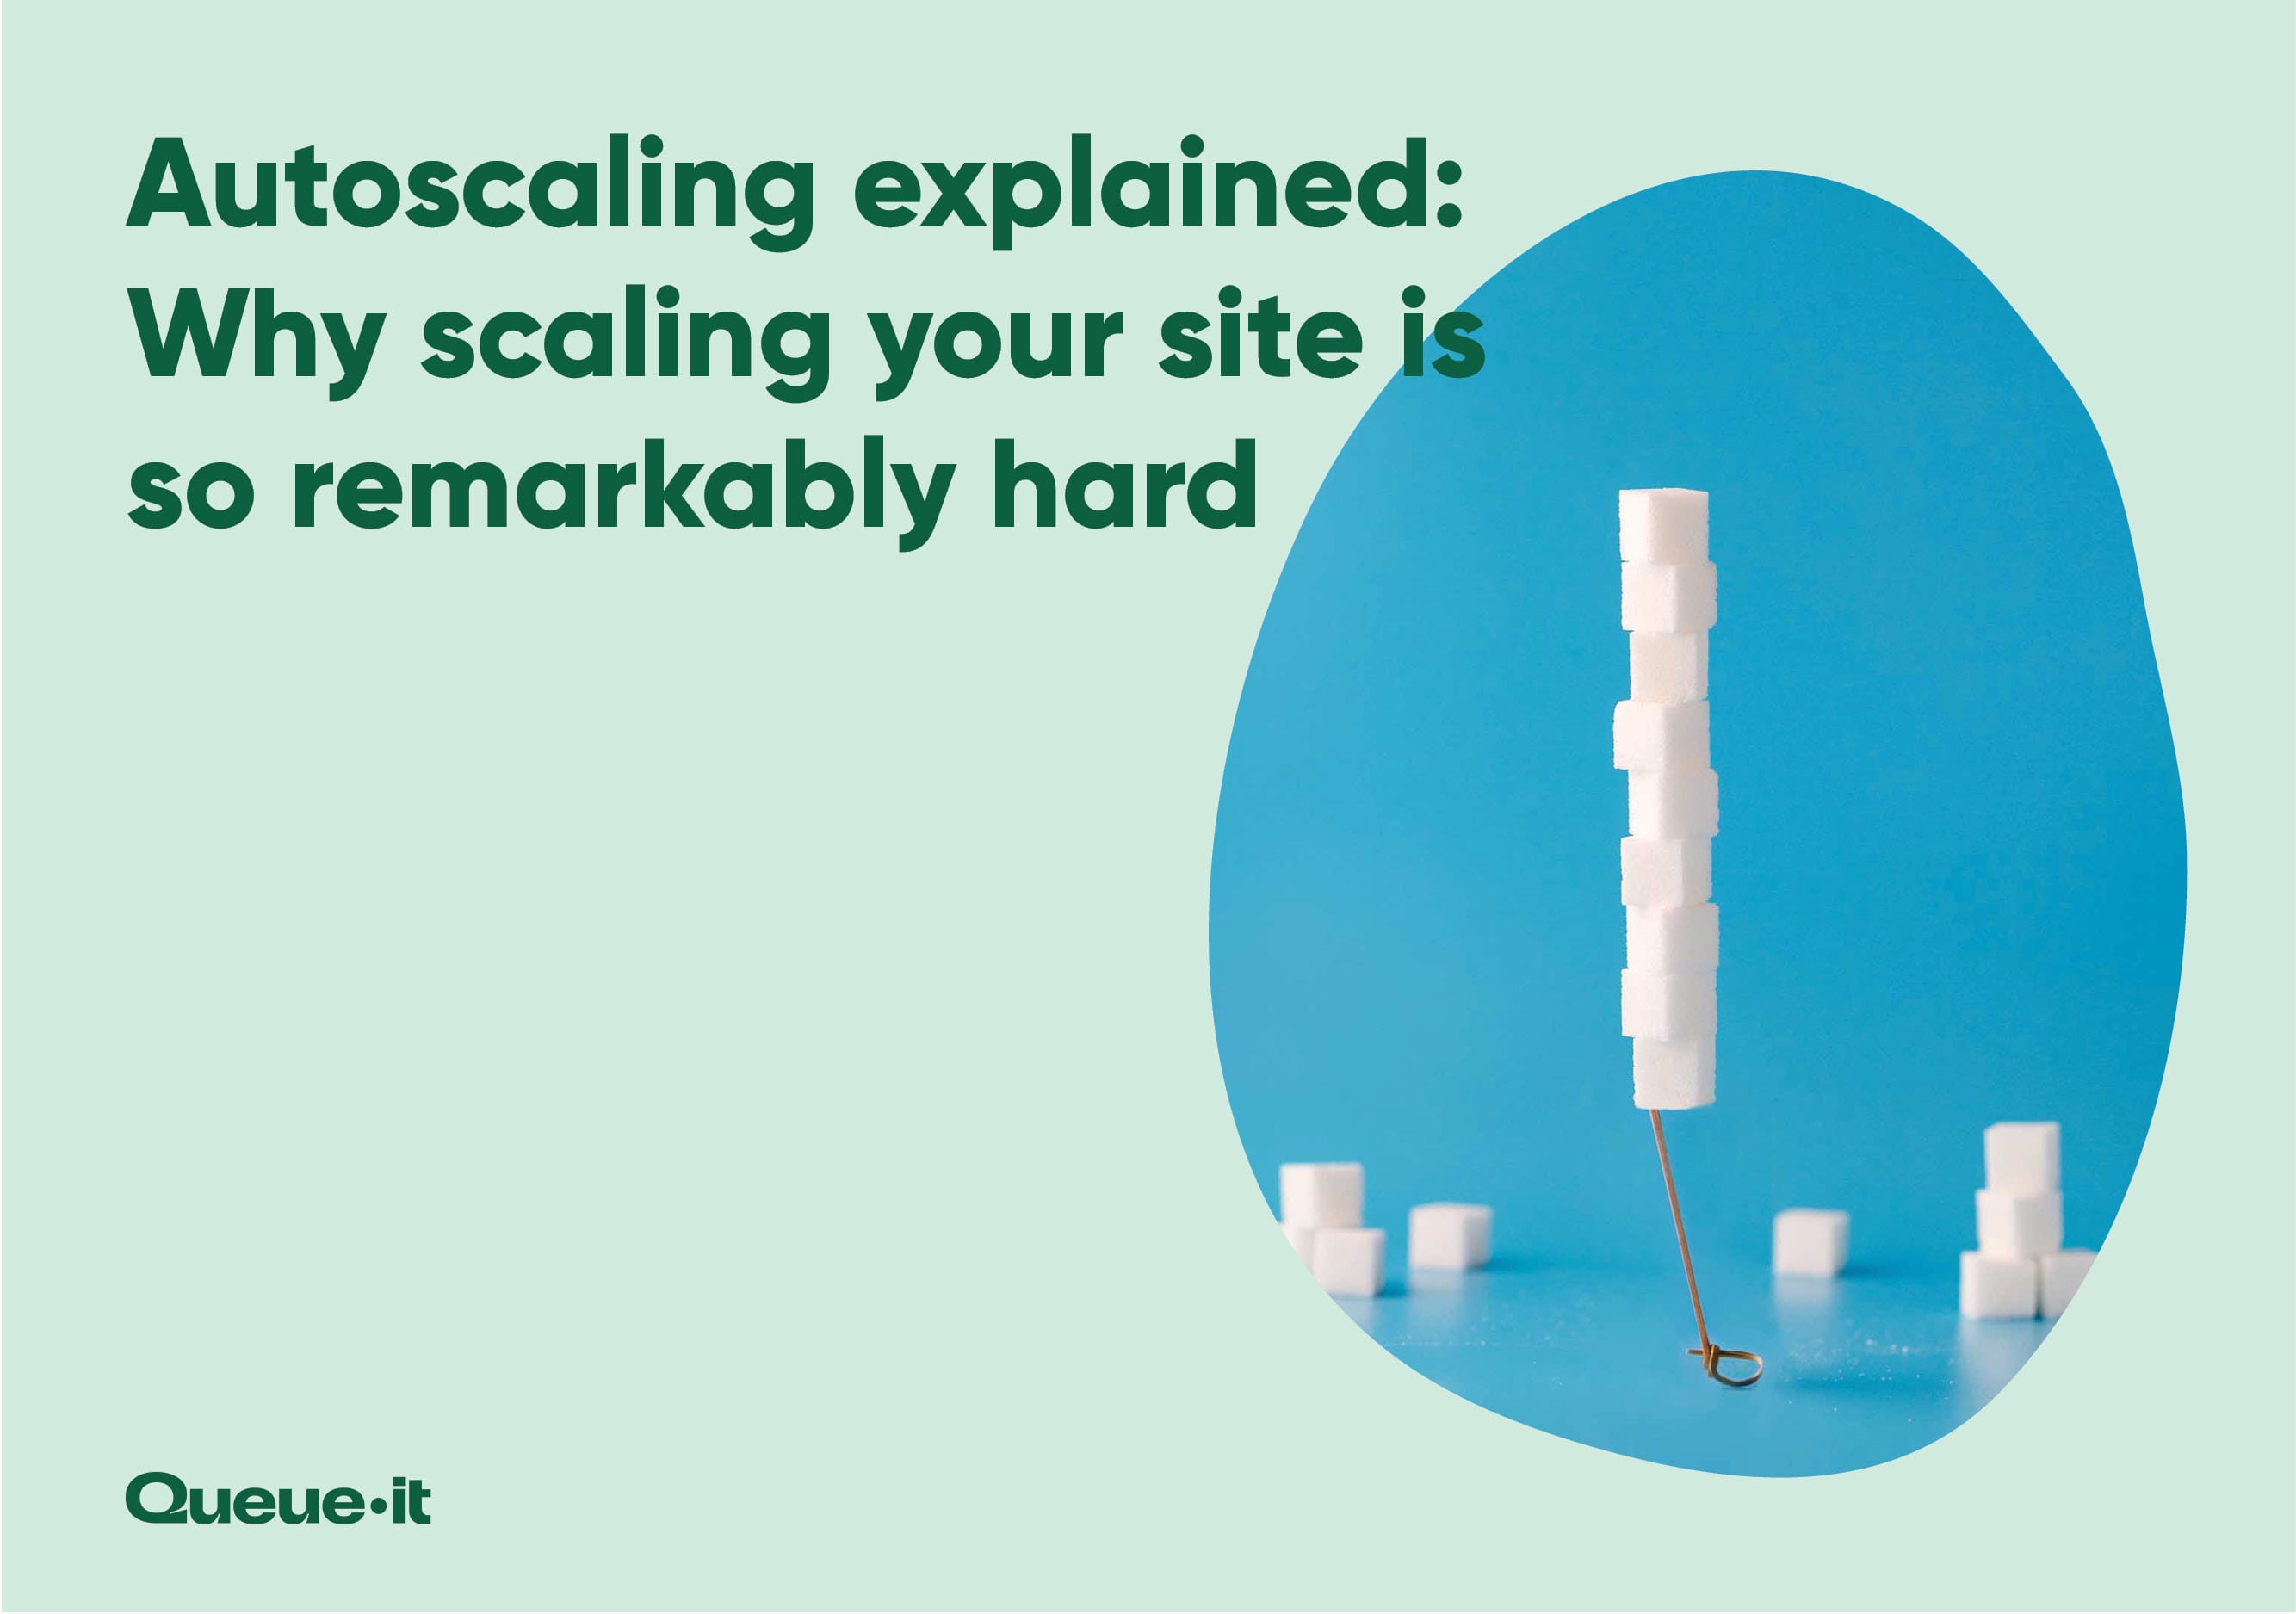 Autoscaling Demystified: Why Scaling Your Site is So Hard guide cover